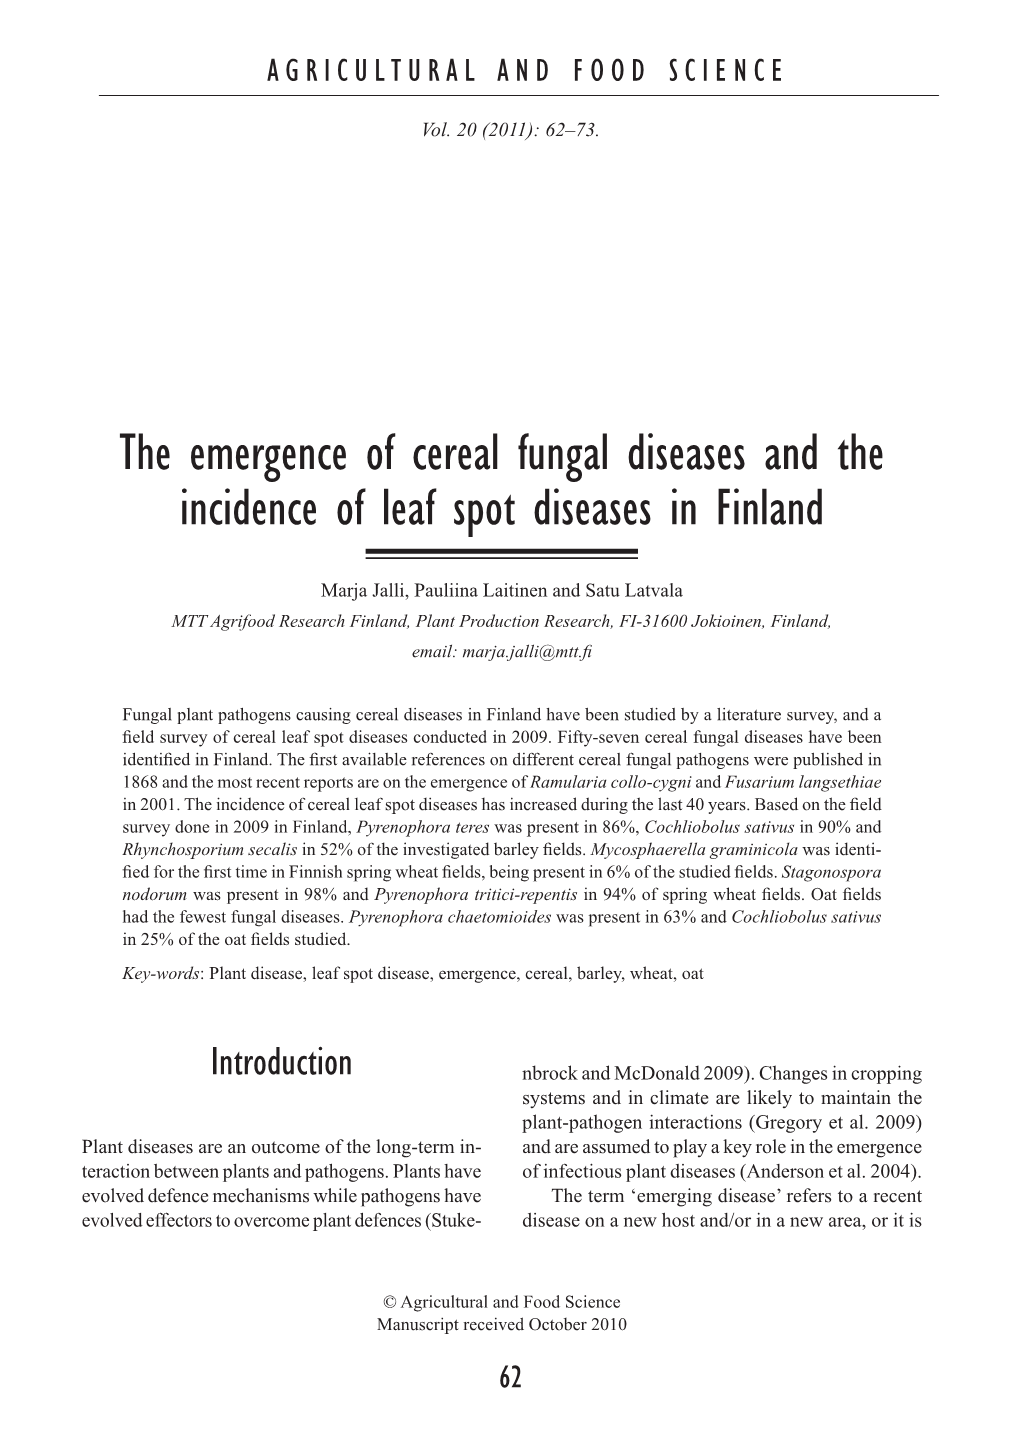 The Emergence of Cereal Fungal Diseases and the Incidence of Leaf Spot Diseases in Finland